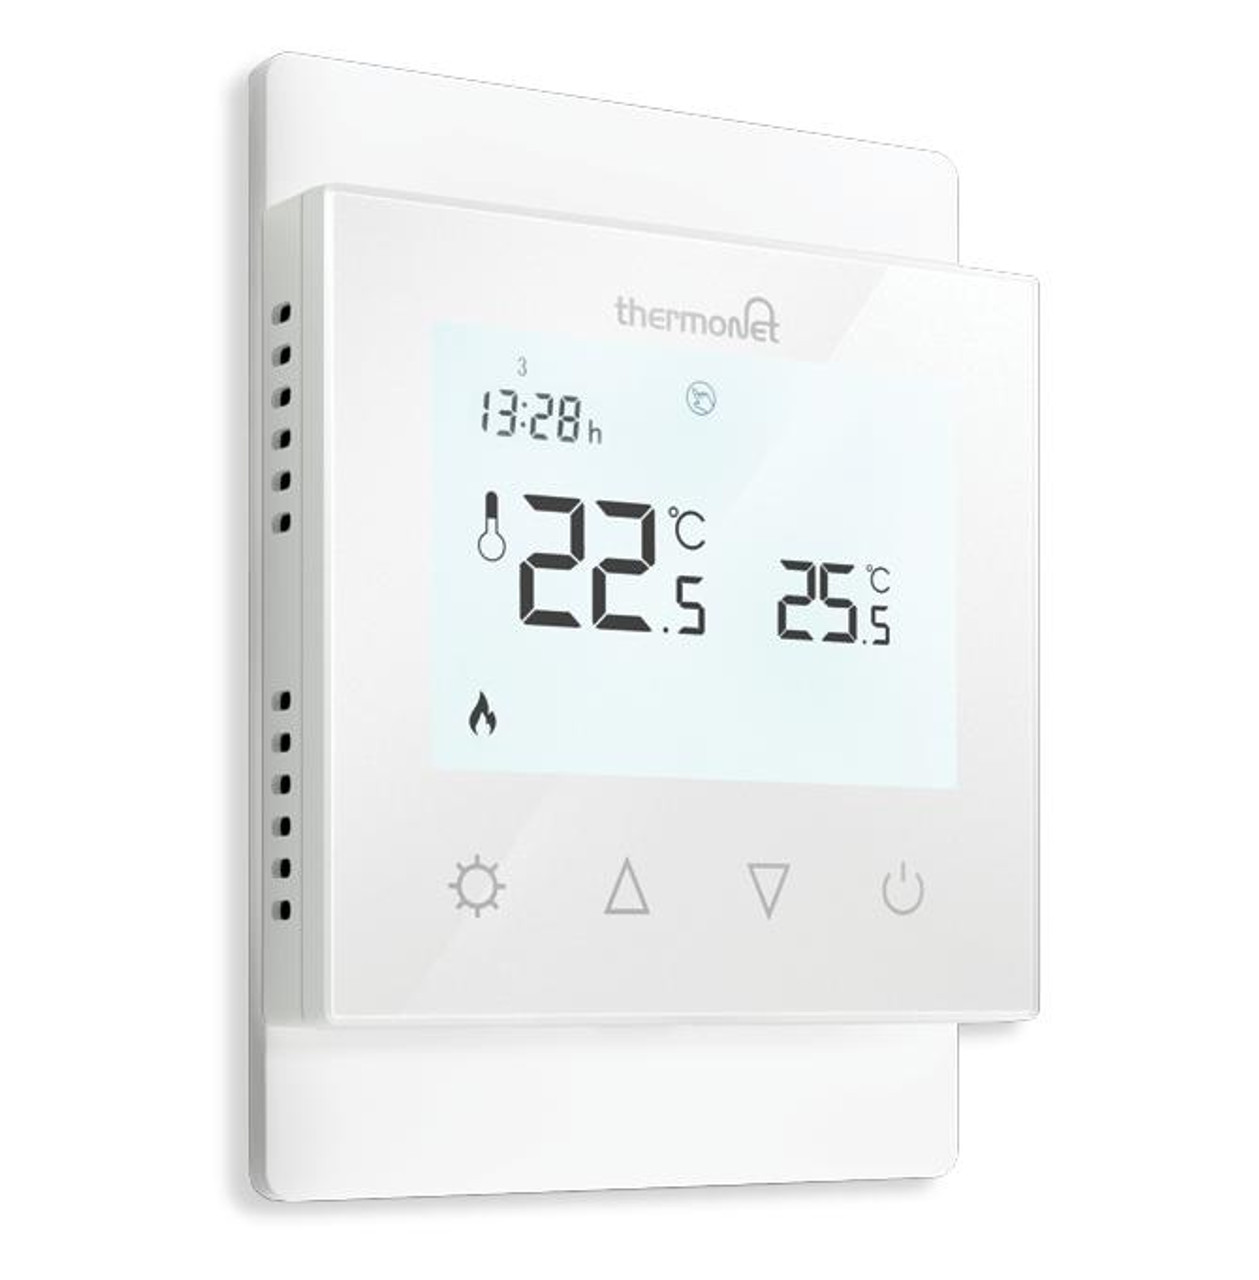 Thermonet EZ 150W/m² Underfloor Heating Kit 115020T with Programmable Thermostat 5220A (10m²)